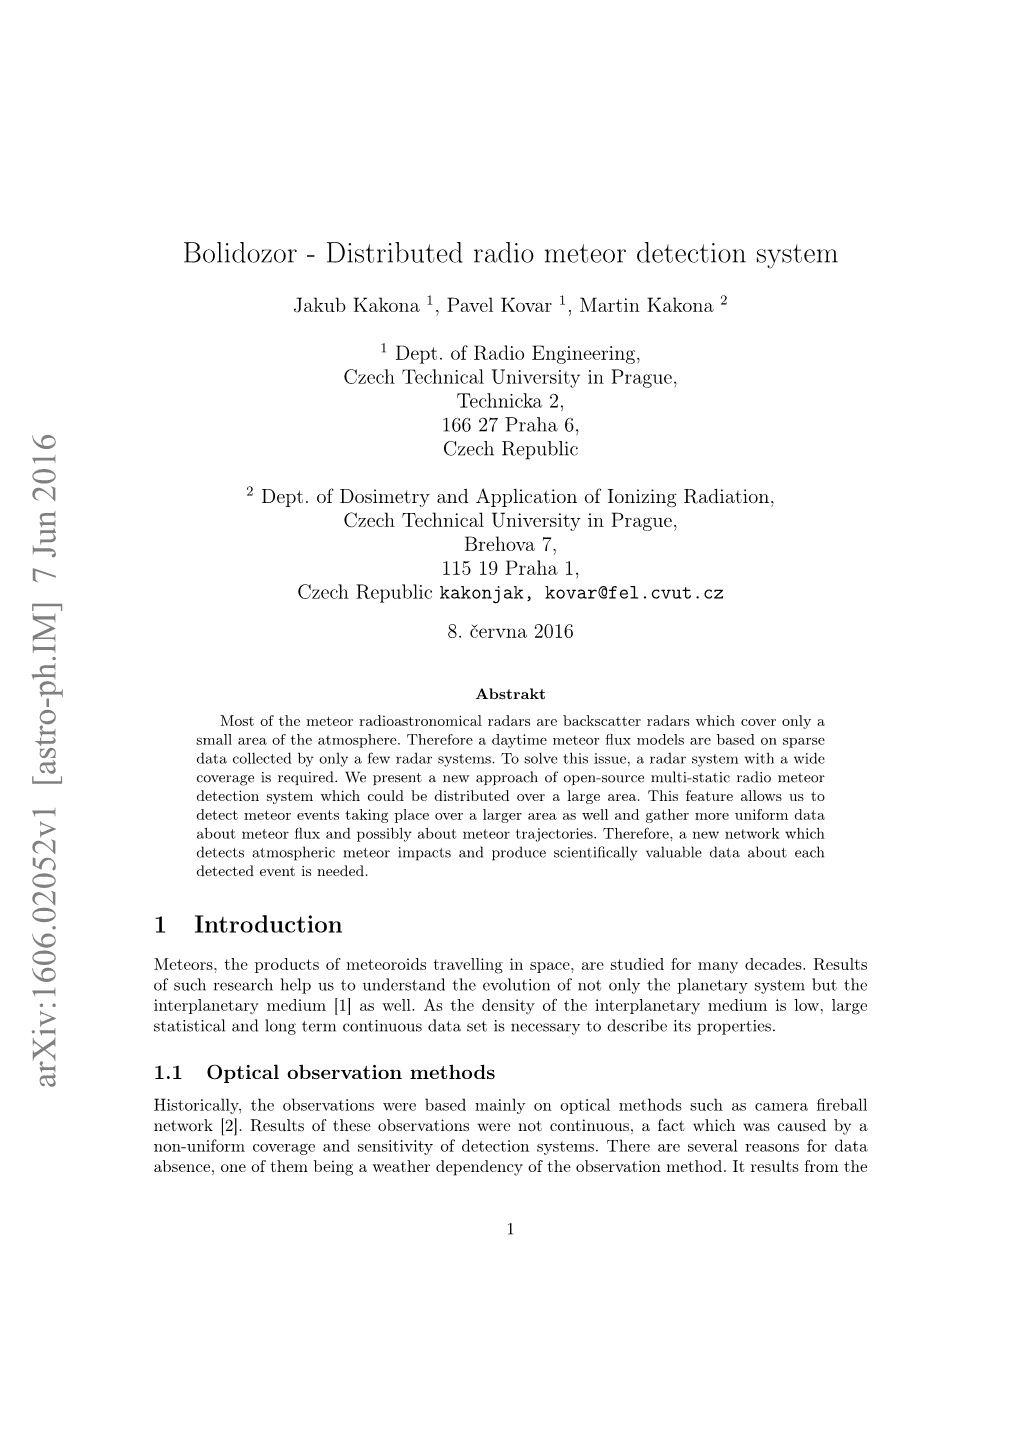 Bolidozor-Distributed Radio Meteor Detection System